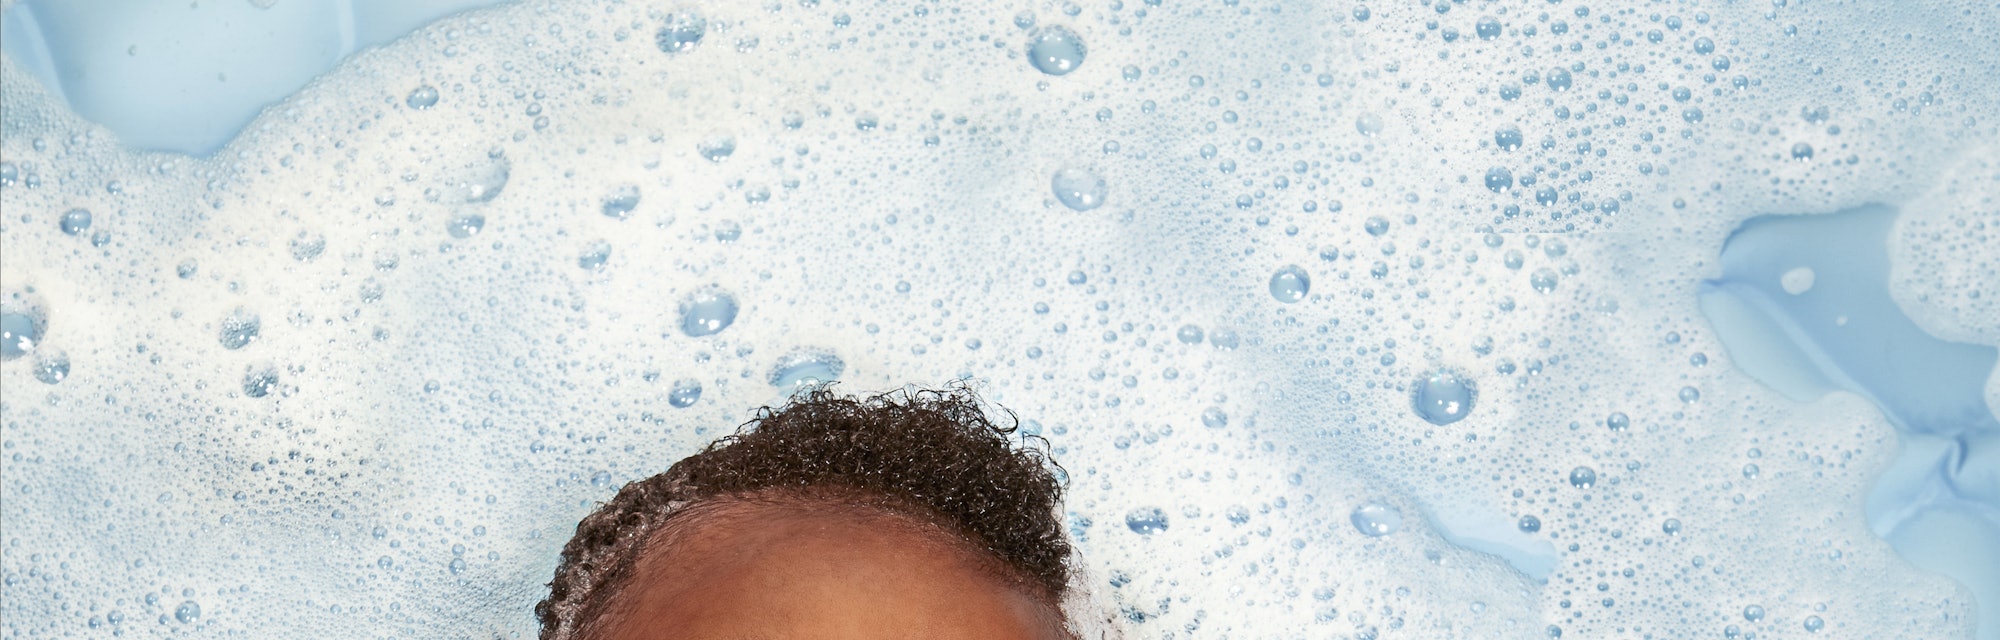 happy baby playing in bubble bath for article on aquarius names for baby boys